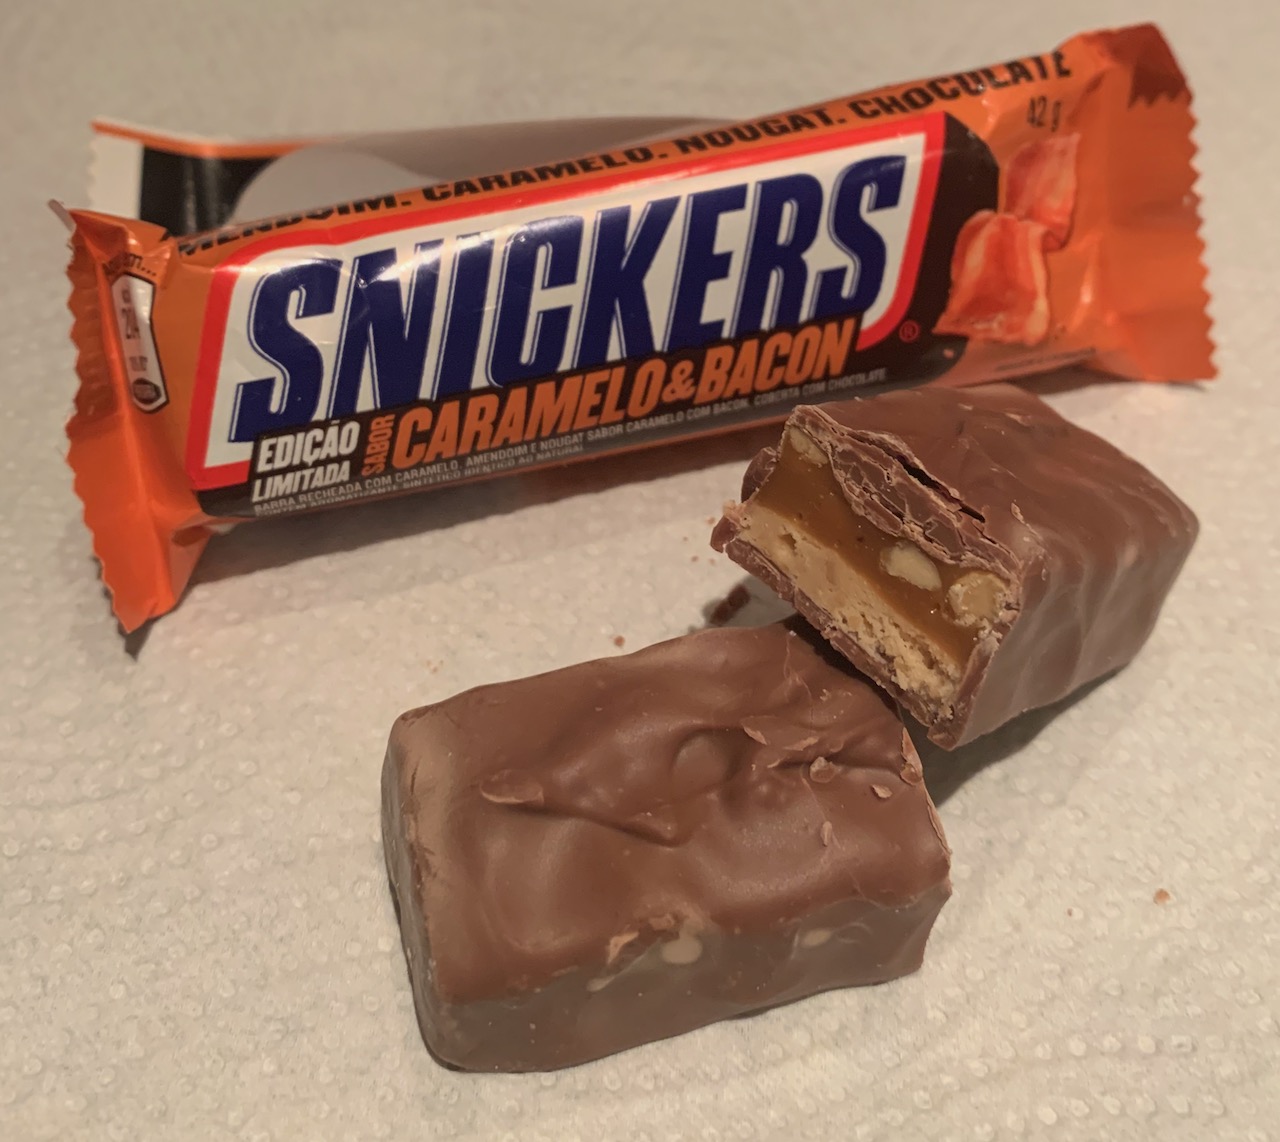 FOODSTUFF FINDS: Snickers Caramel &amp; Bacon Edition (Candy Mail) By @Cinabar